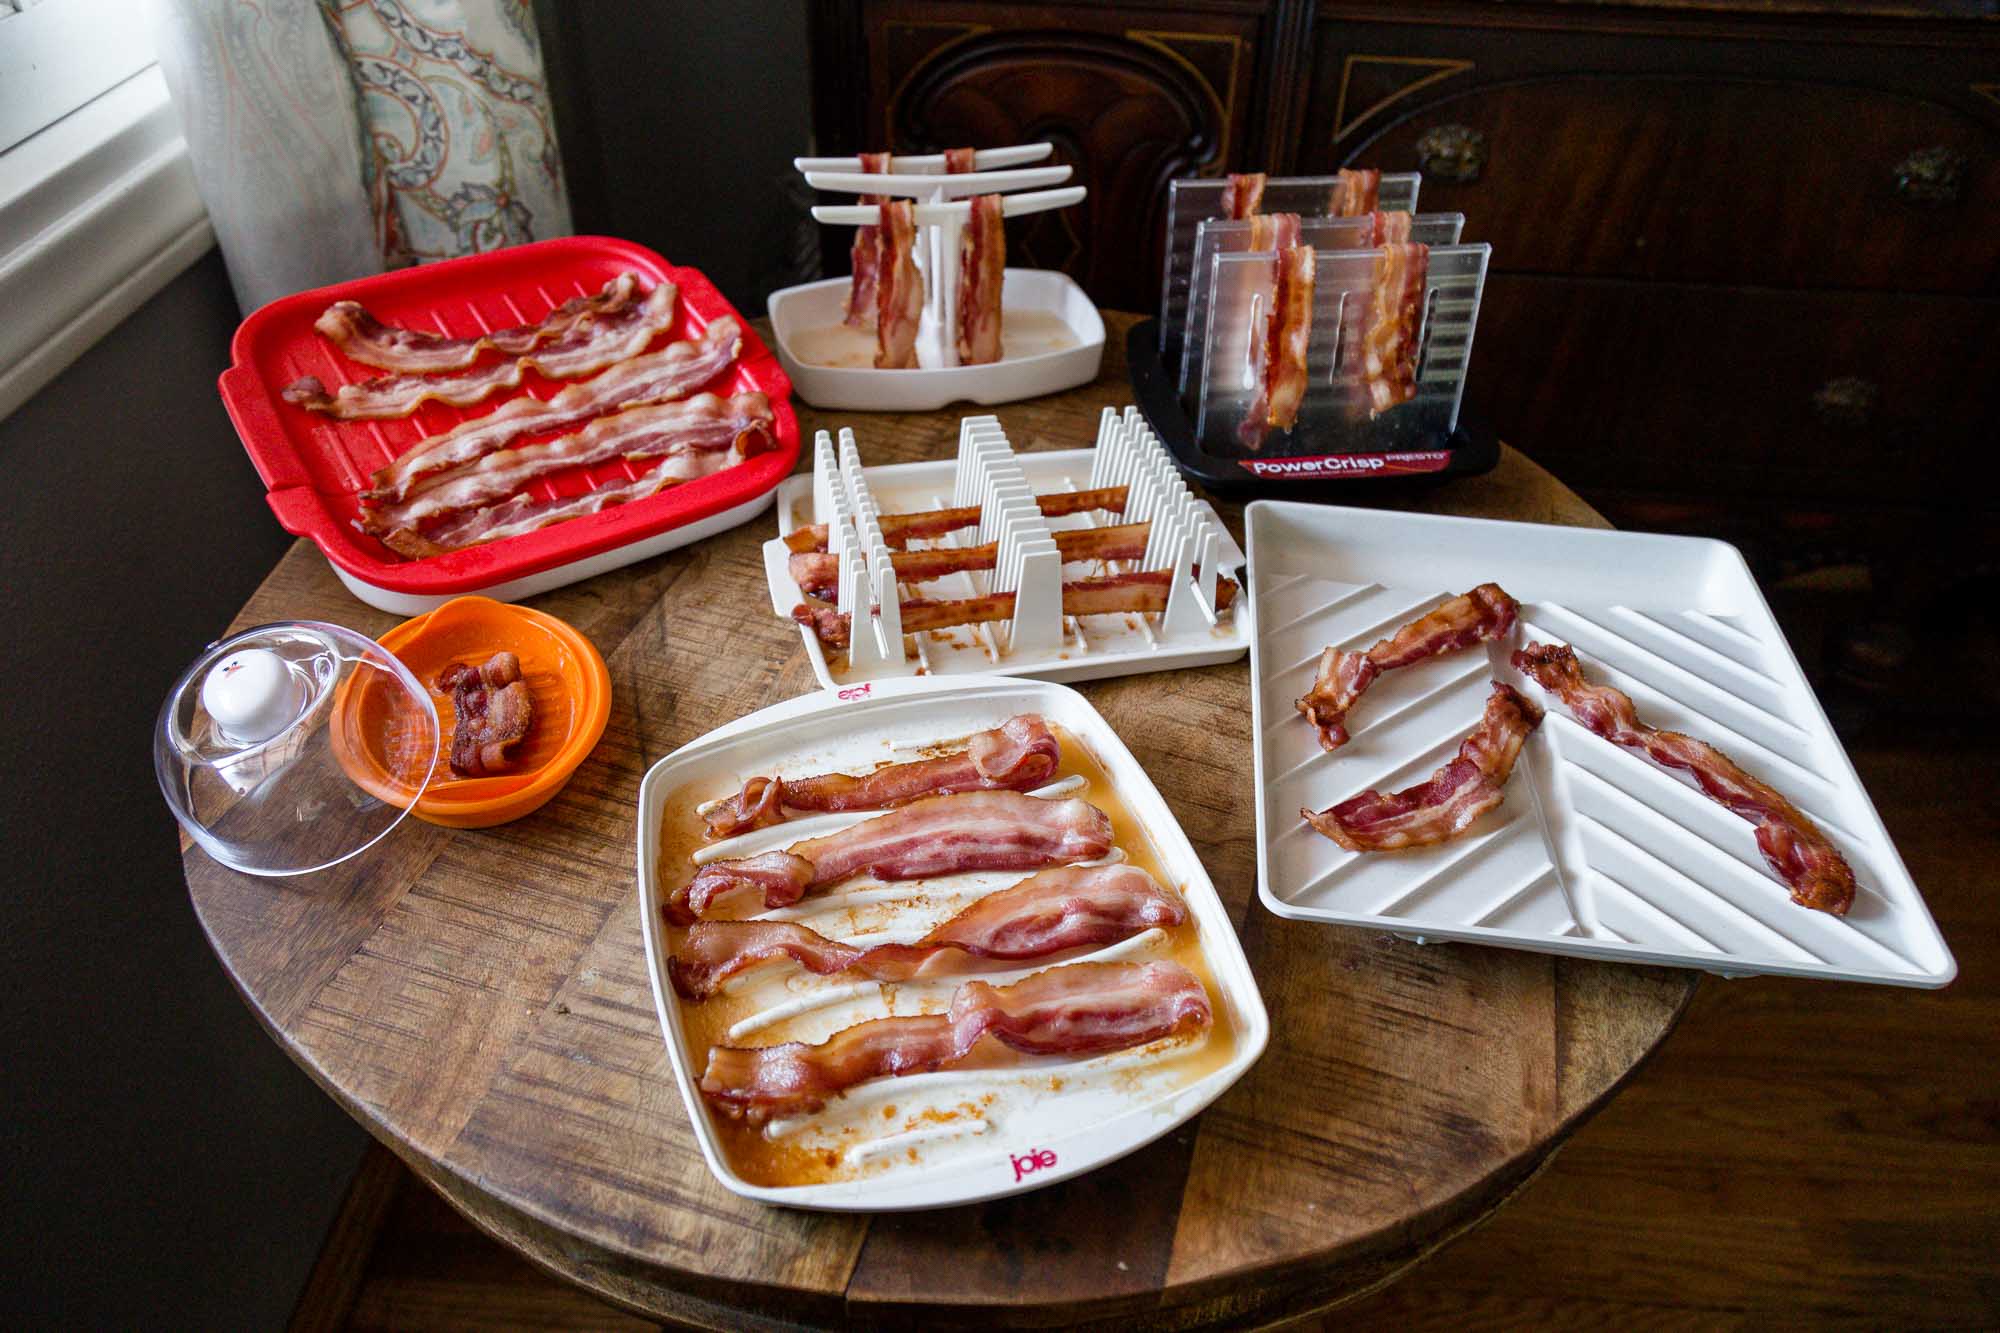 Group of microwave bacon cookers on table